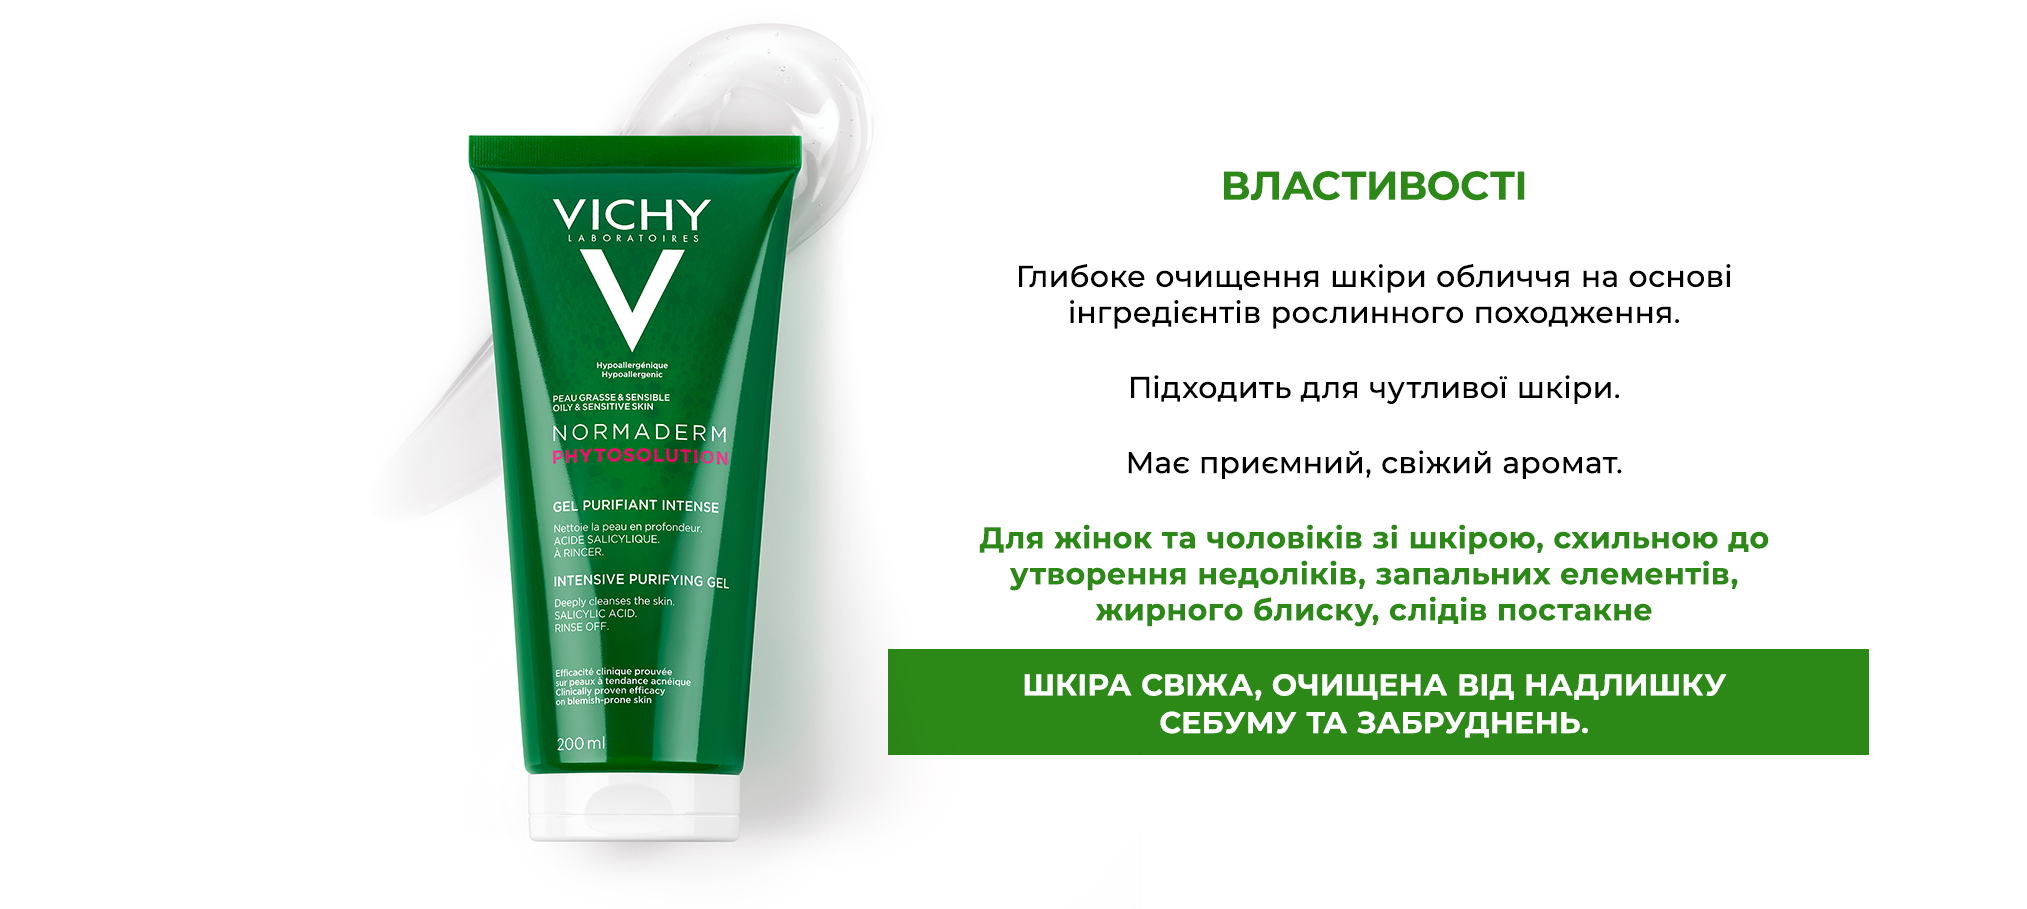 Vichy Normaderm Phytosolution Intensive Purifying Gel